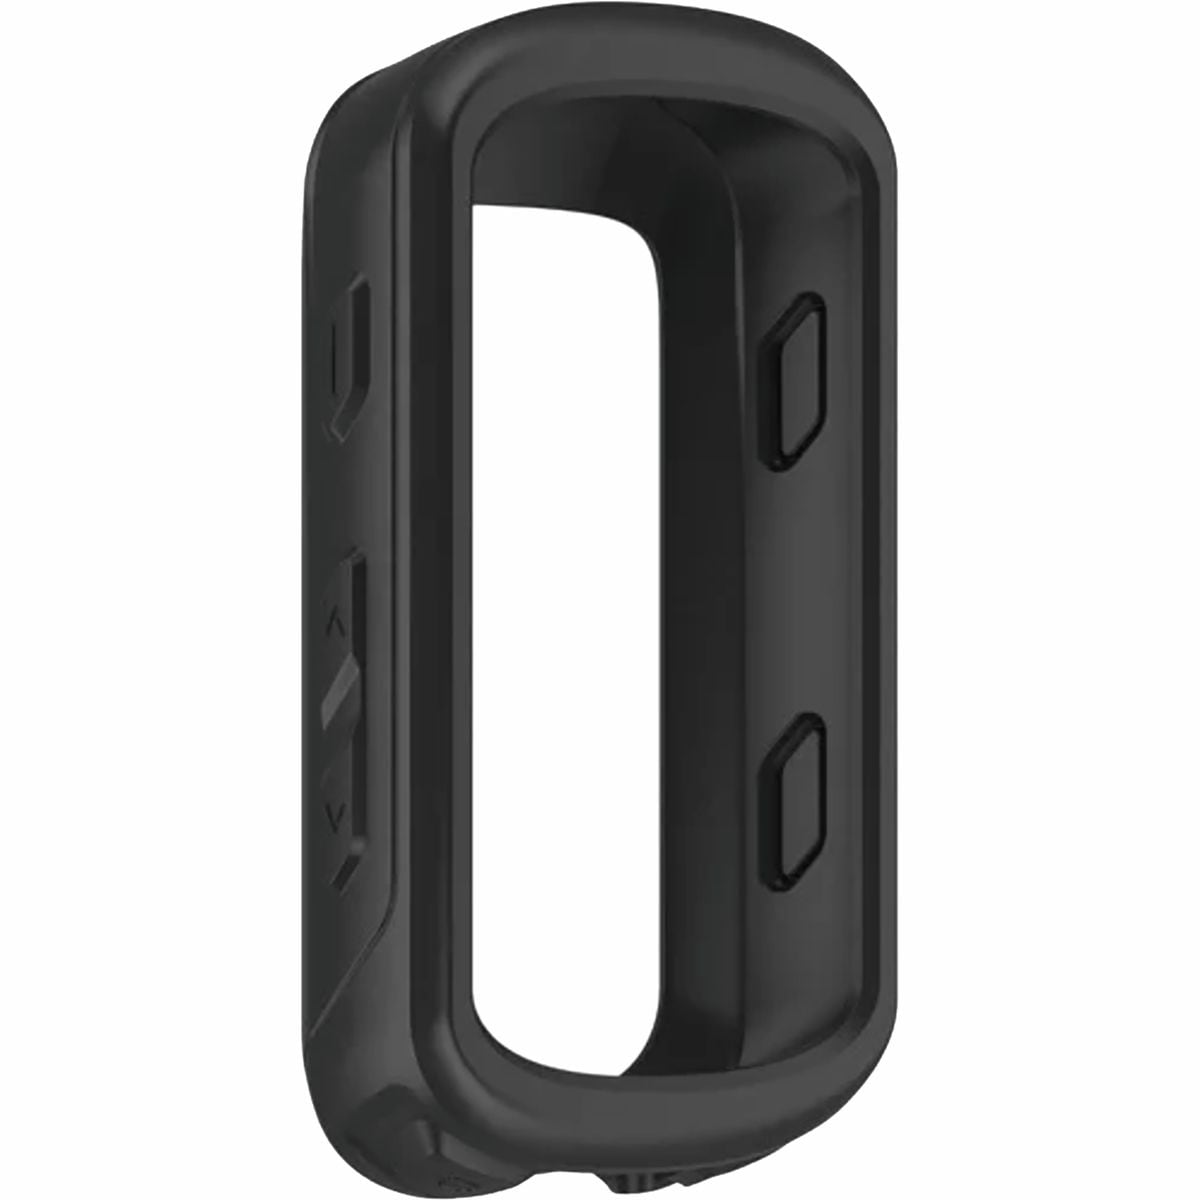 Silicone Protective Cases Cover Shell for Garmin Edge 530 GPS Cycling Computer 